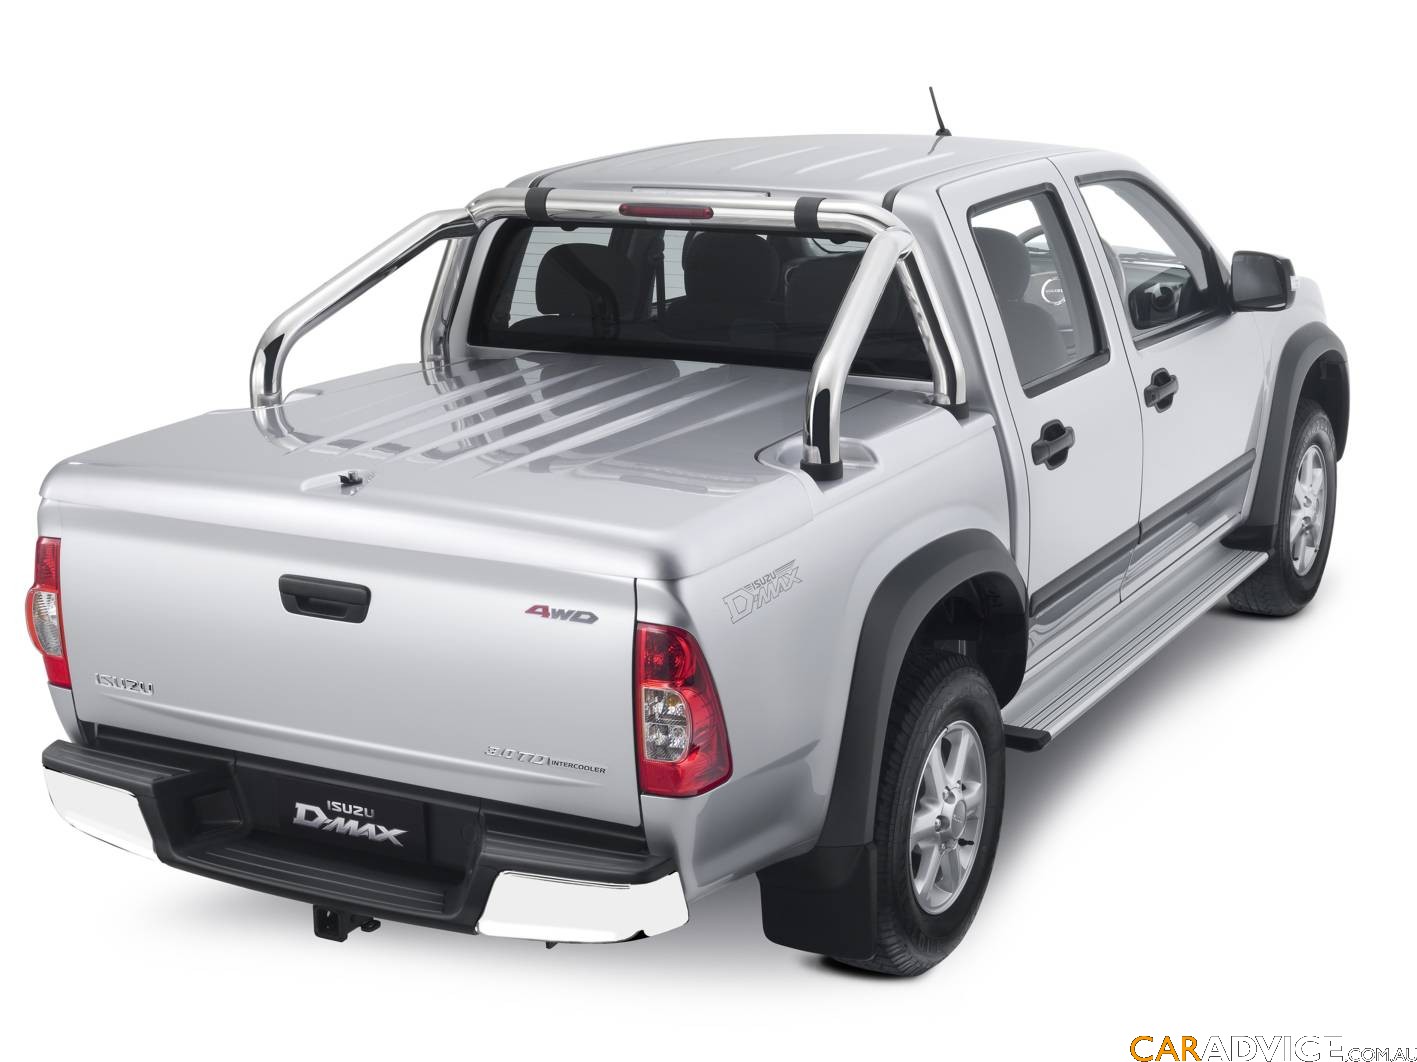 Isuzu Dmax 2010 Review, Amazing Pictures and Images